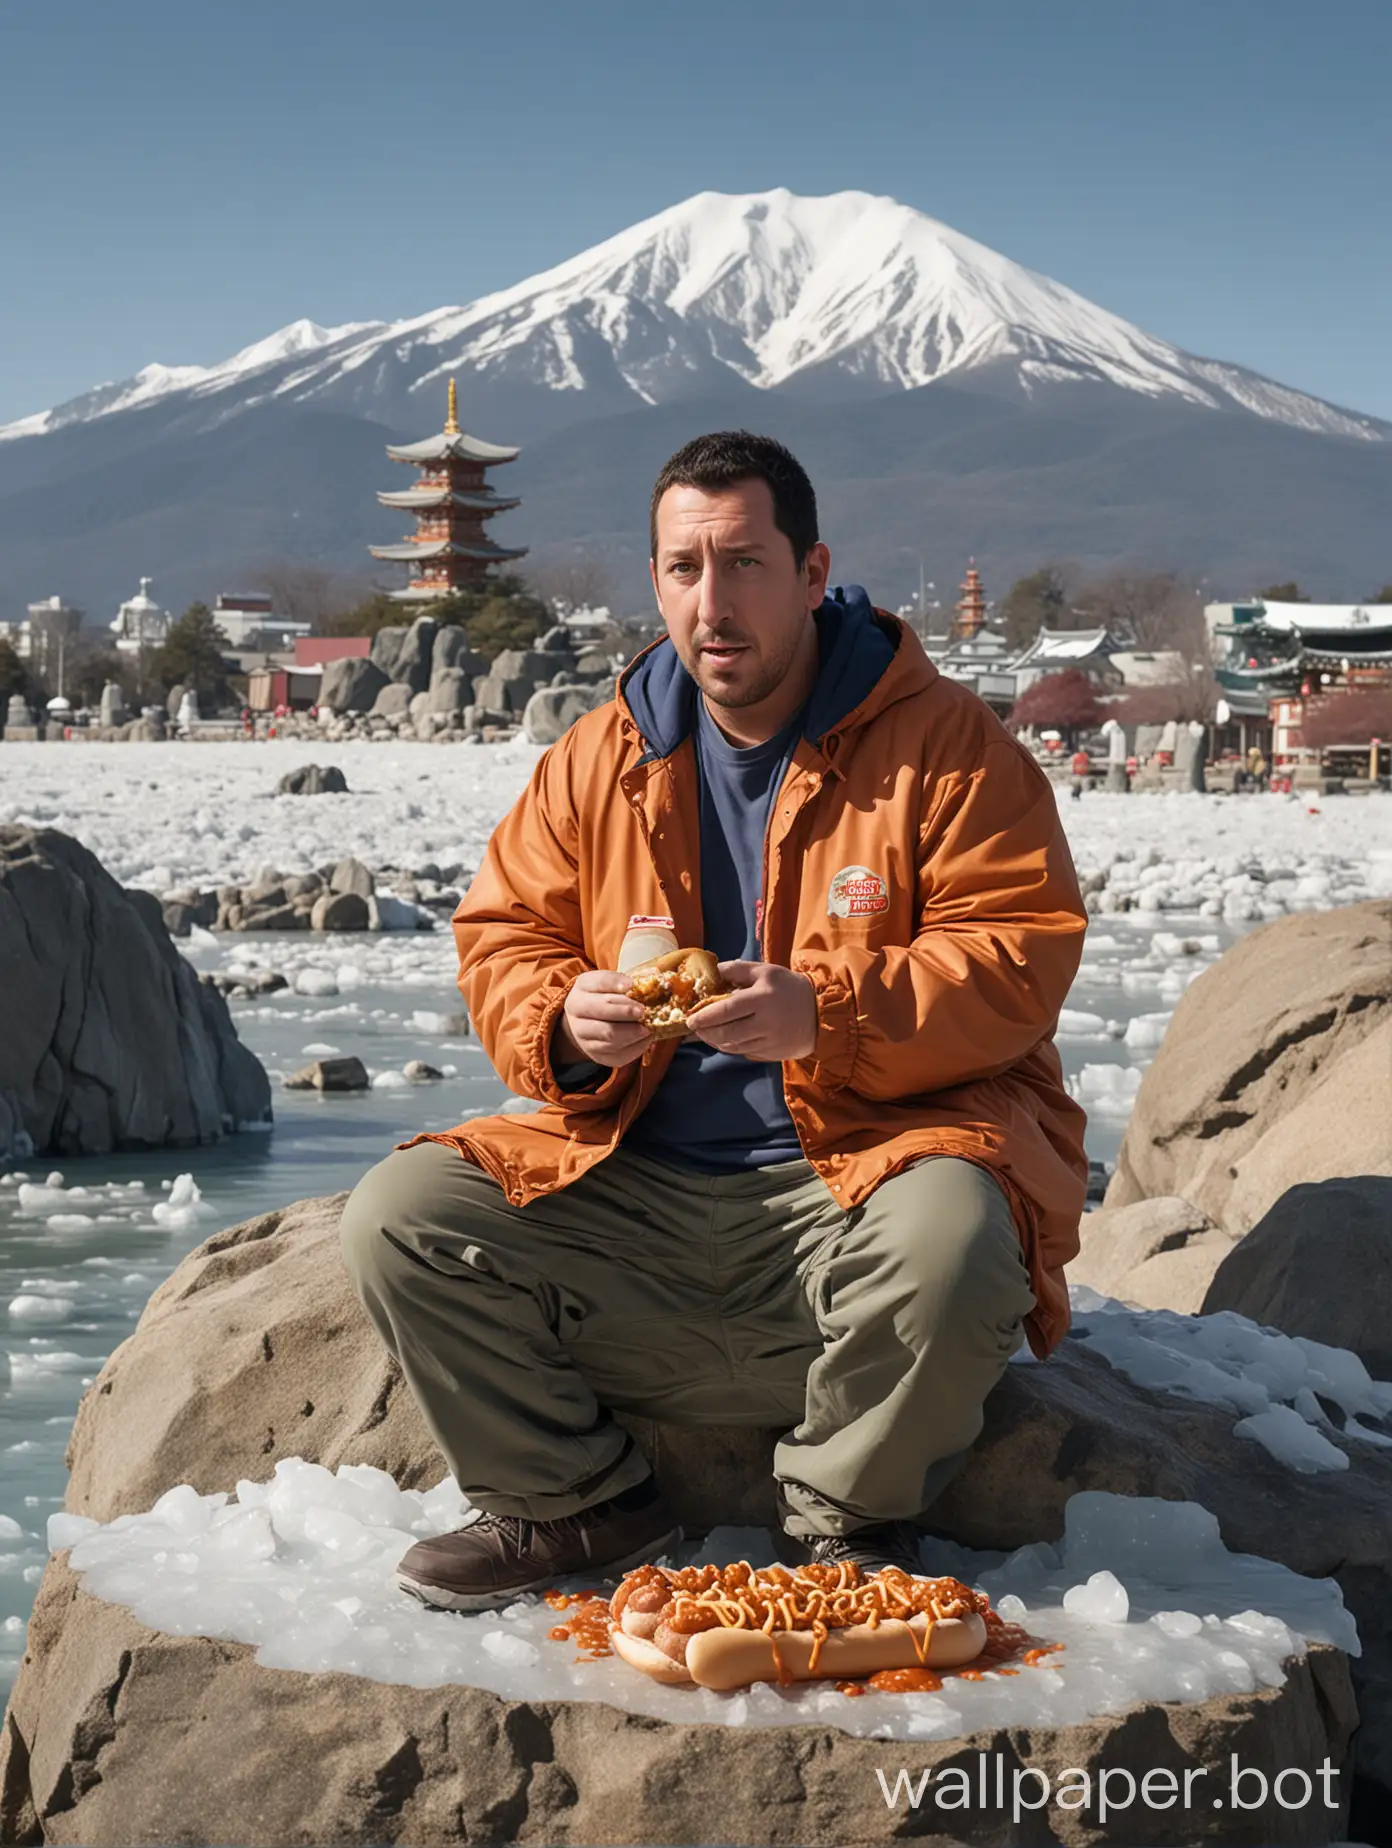 Adam Sandler, sitting on a big rock, eating a chili dog, with melting ice caps and Japanese temples in background